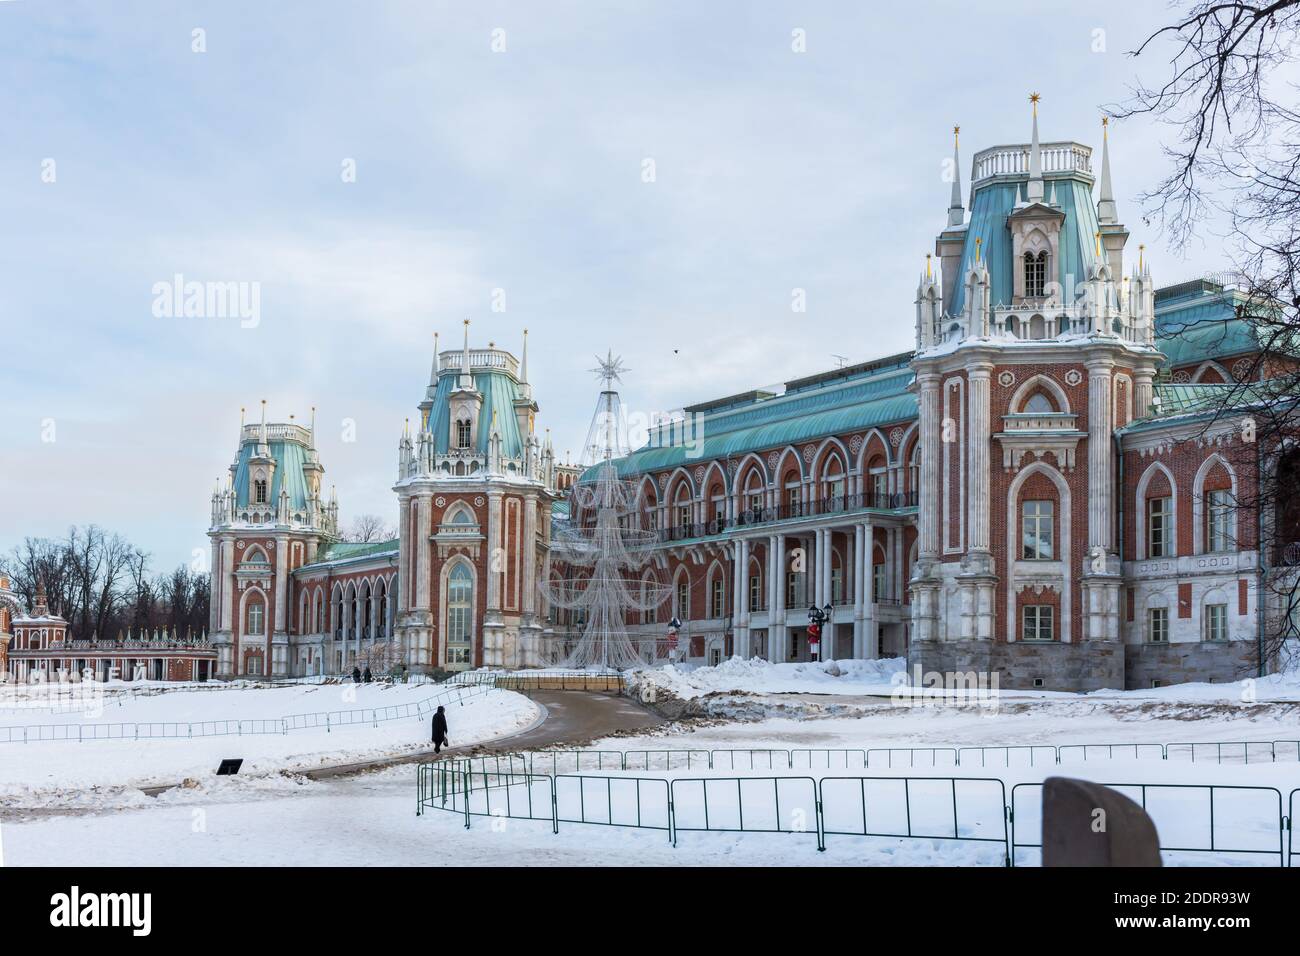 Tsaritsyno Park - Museum in the winter of February 08, 2019. State historical and architectural Museum-reserve. View of the main facade of the Palace. Stock Photo